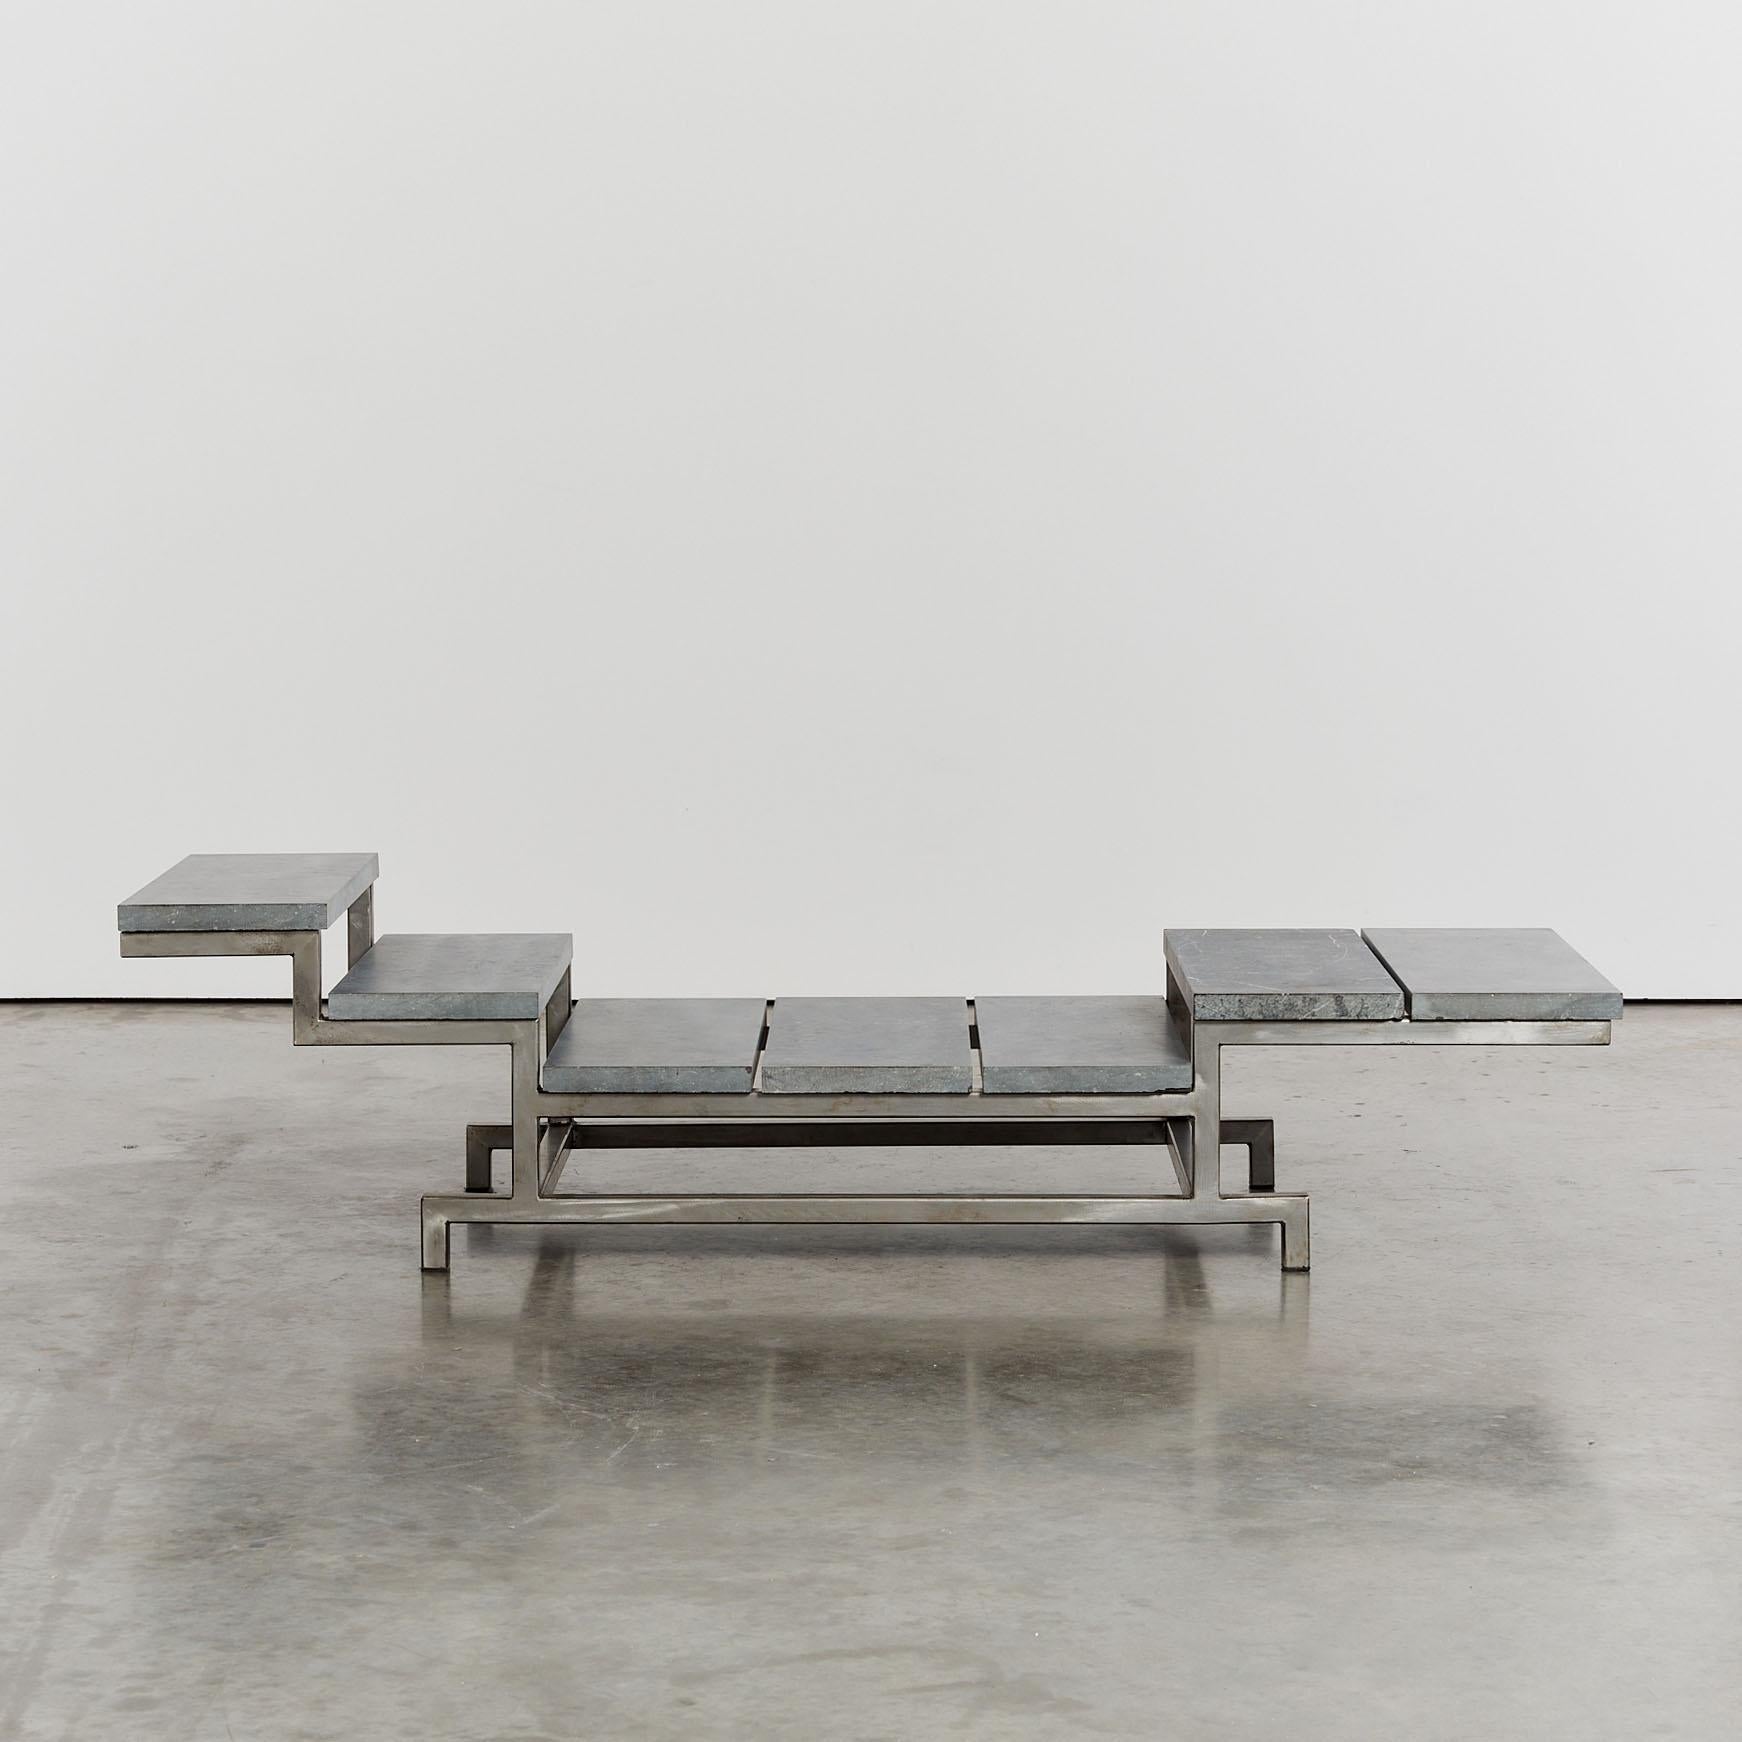 Hand crafted from German steel, the 'Contemplation' daybed by German artist/designer Christoph R Siebrasse features his signature cubist steel framing with marble slabs and a generous felt cover. First designed in 1988, Contemplation is one of five